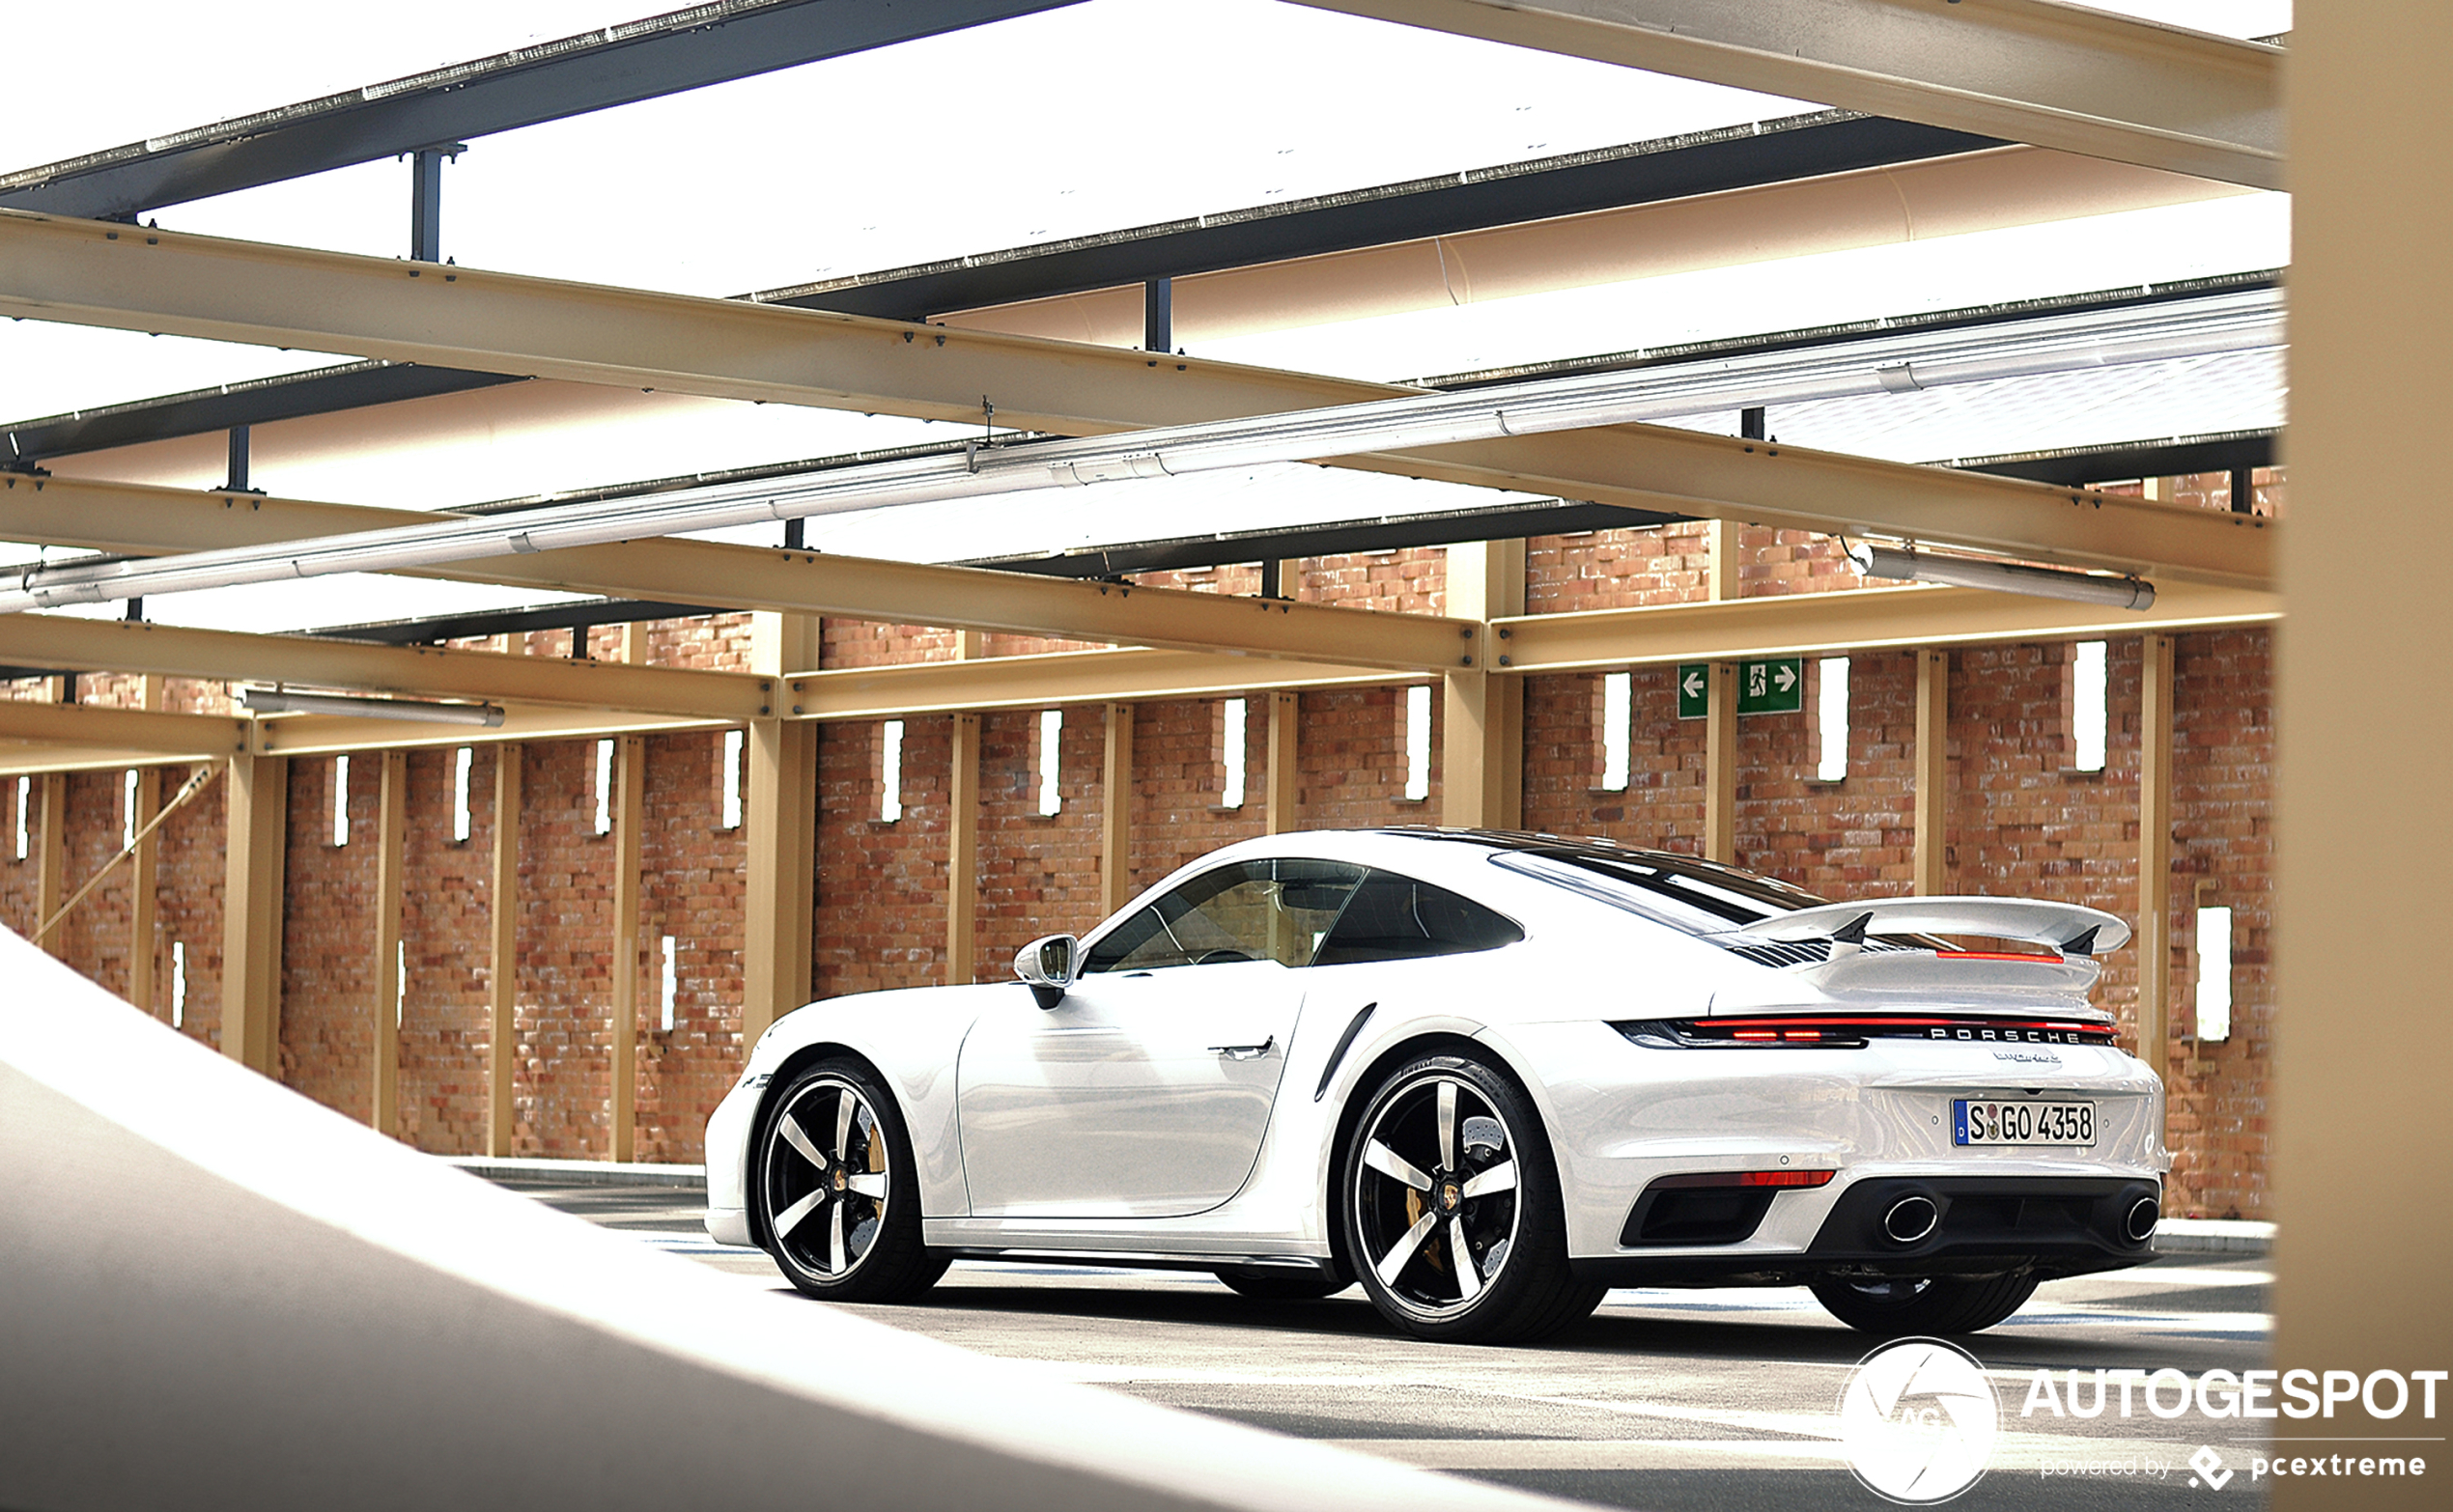 We can add the Coupé to the site: Porsche 992 Turbo 